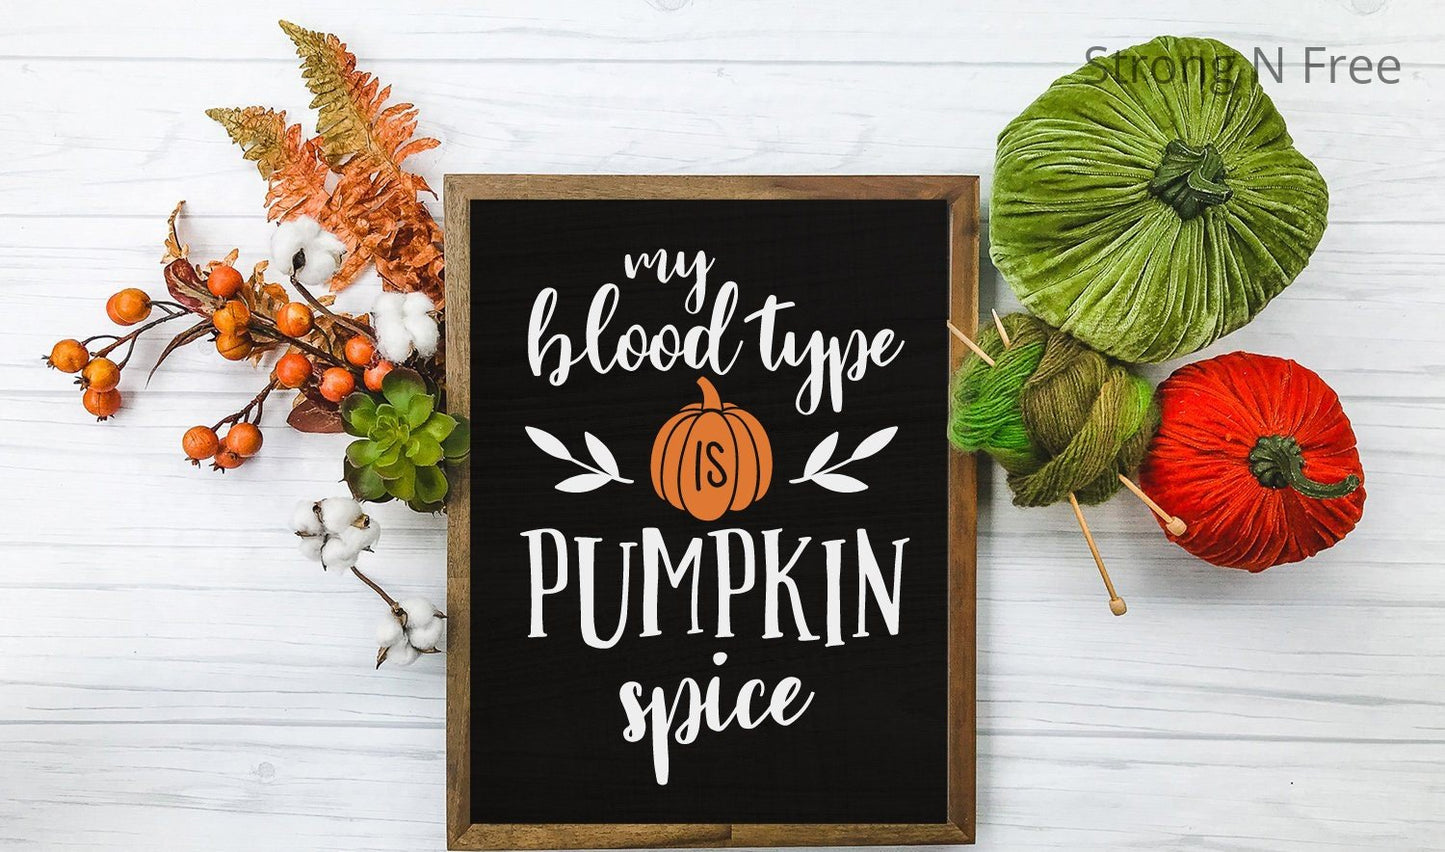 Fall signs -  fall mini tiered tray signs - fall mini signs - tiered tray signs - tiered tray decor - sweater weather - pumpkin patch